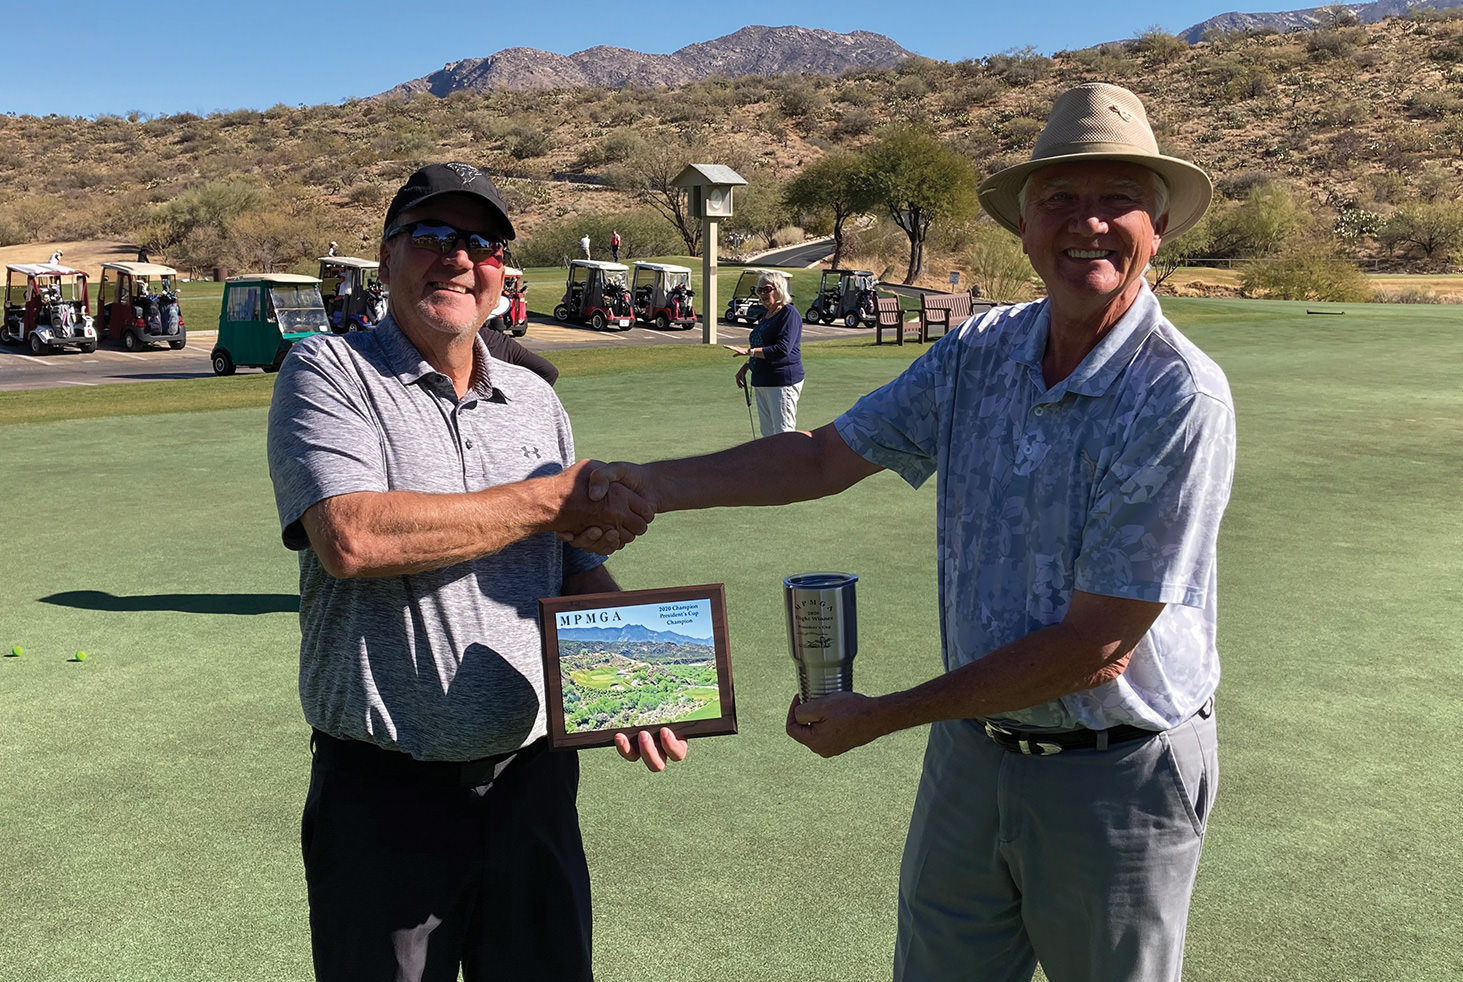 Lee Leksell (left) is congratulated by Dan Nordhill, MPMGA president, on winning the 2020 President’s Cup.